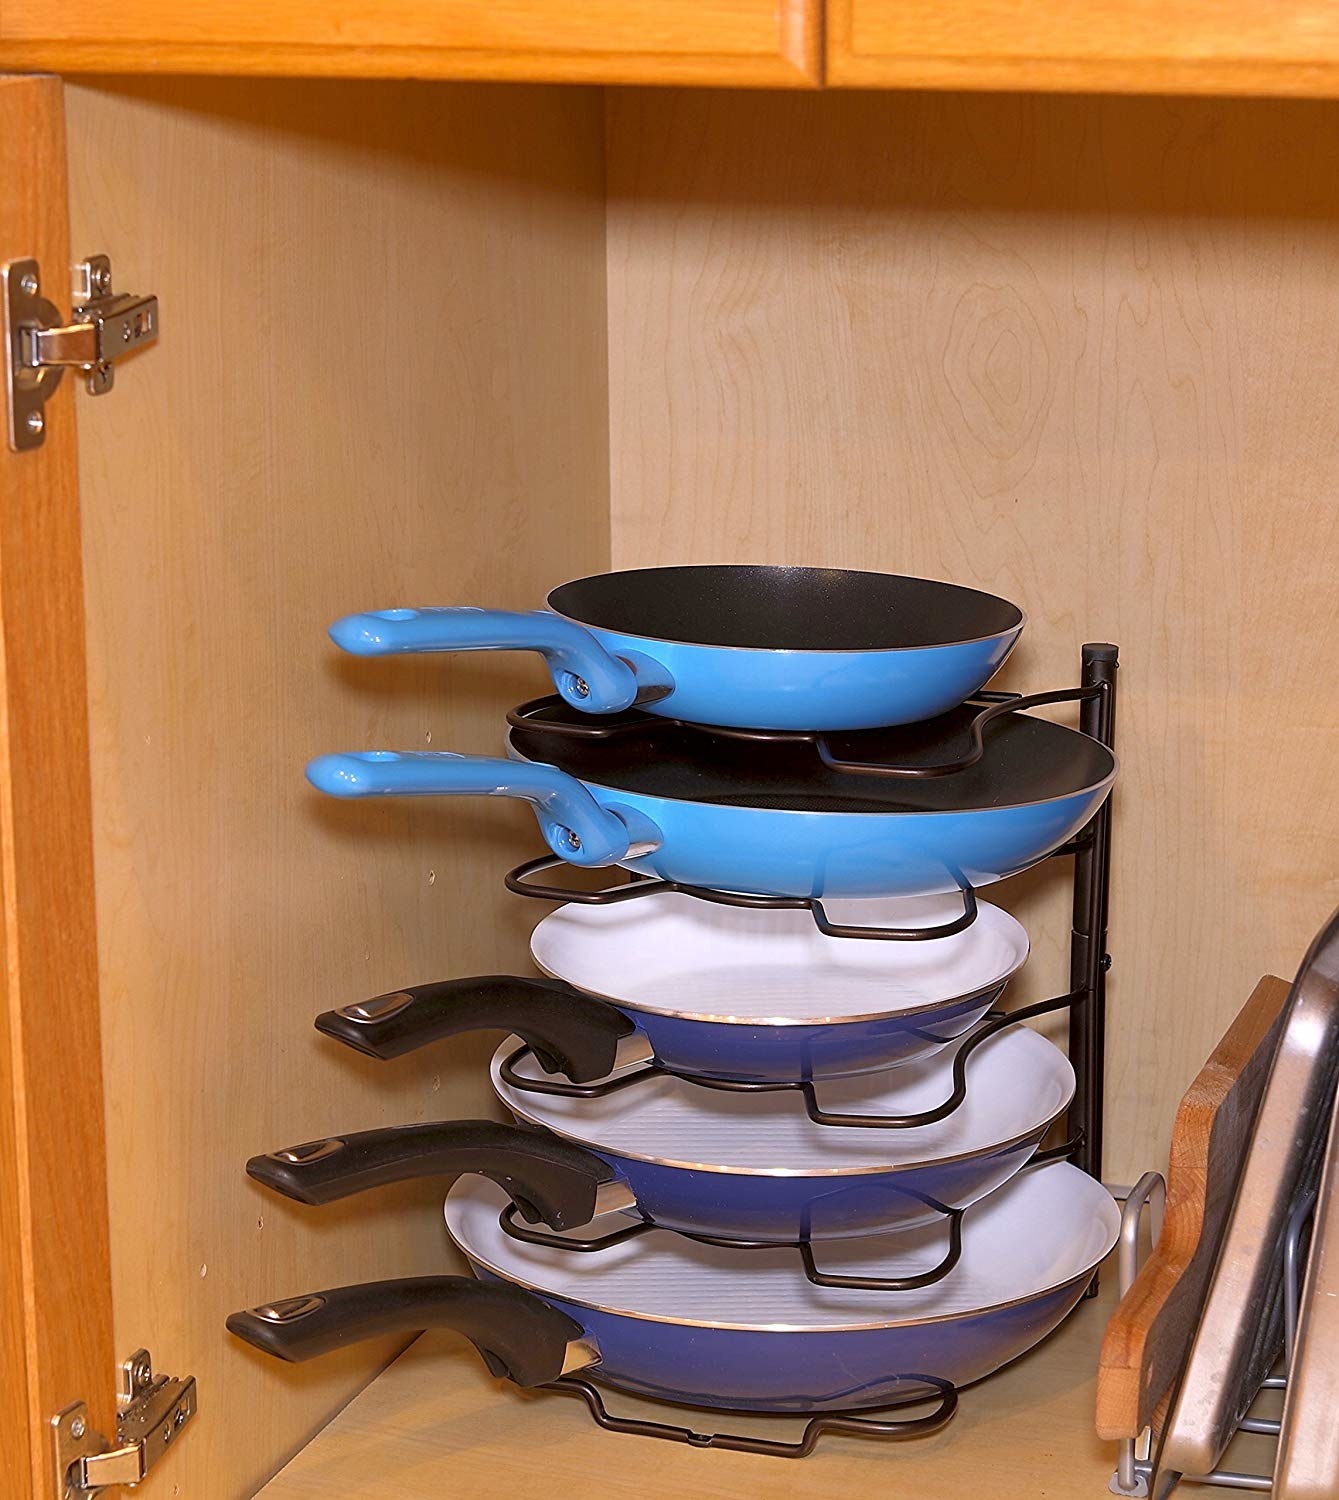 A five-tiered rack to hold a variety of frying pans